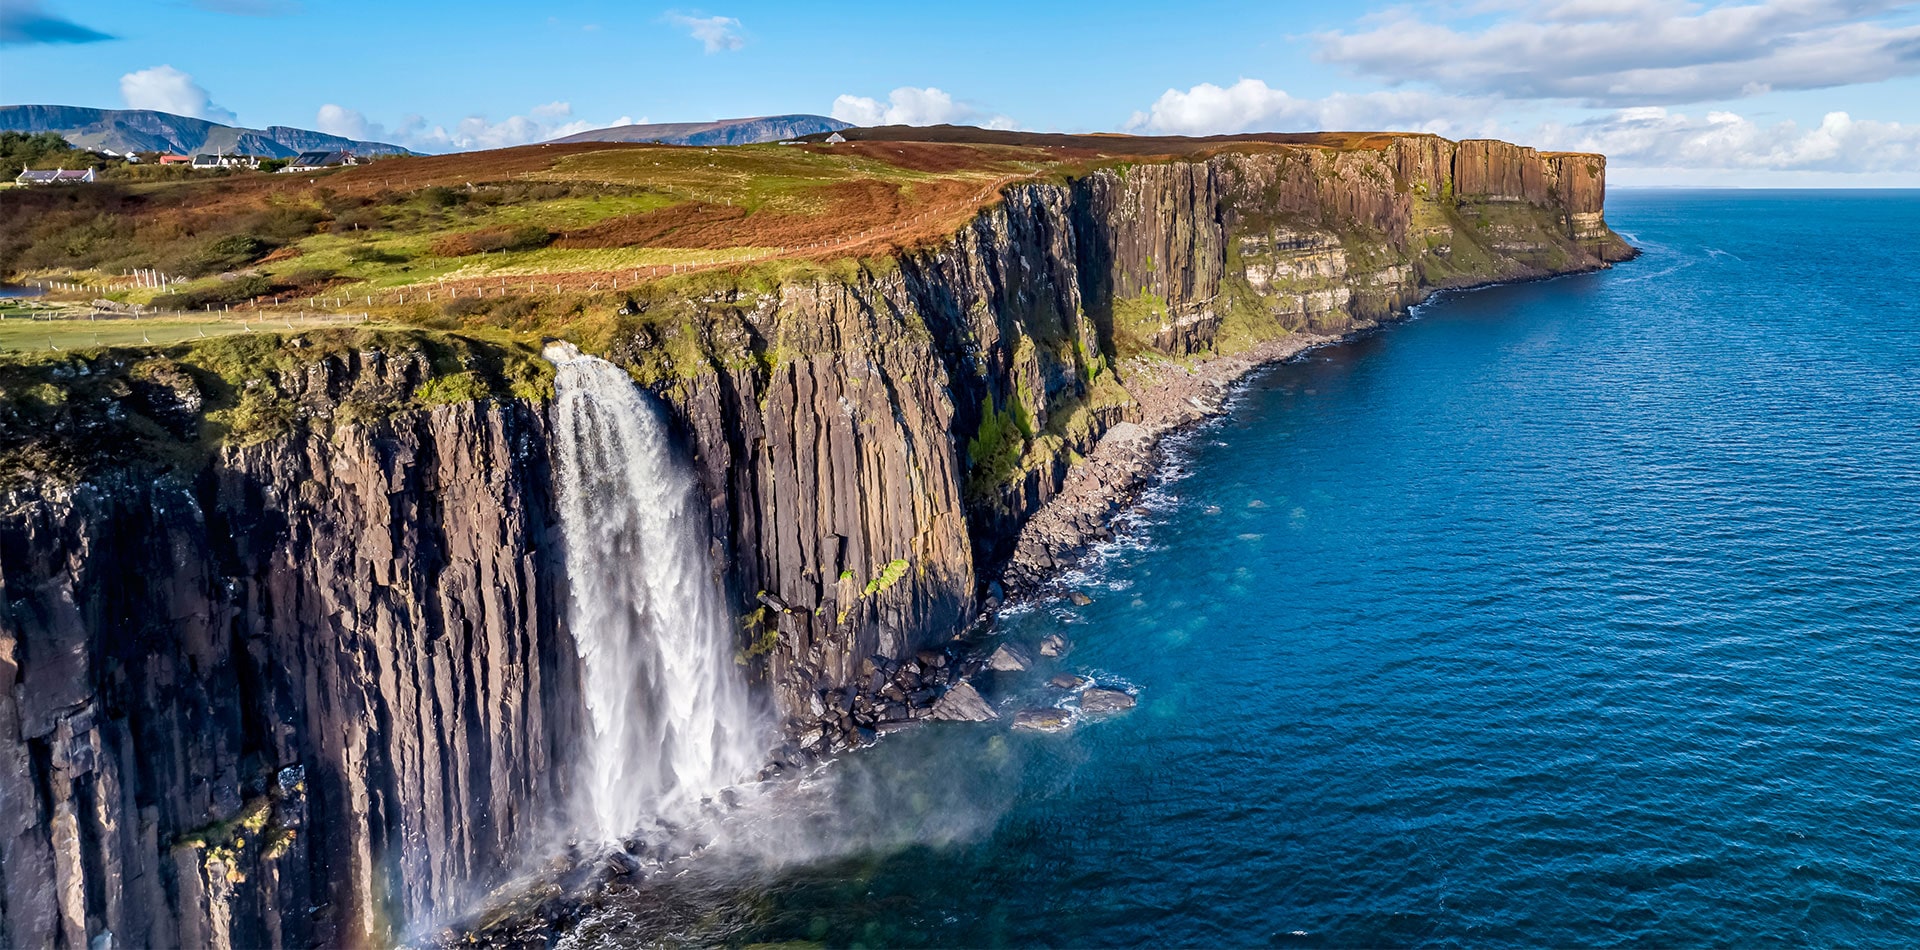 Cliffs by Staffin with the famous Kilt Rock waterfall, Scotland 